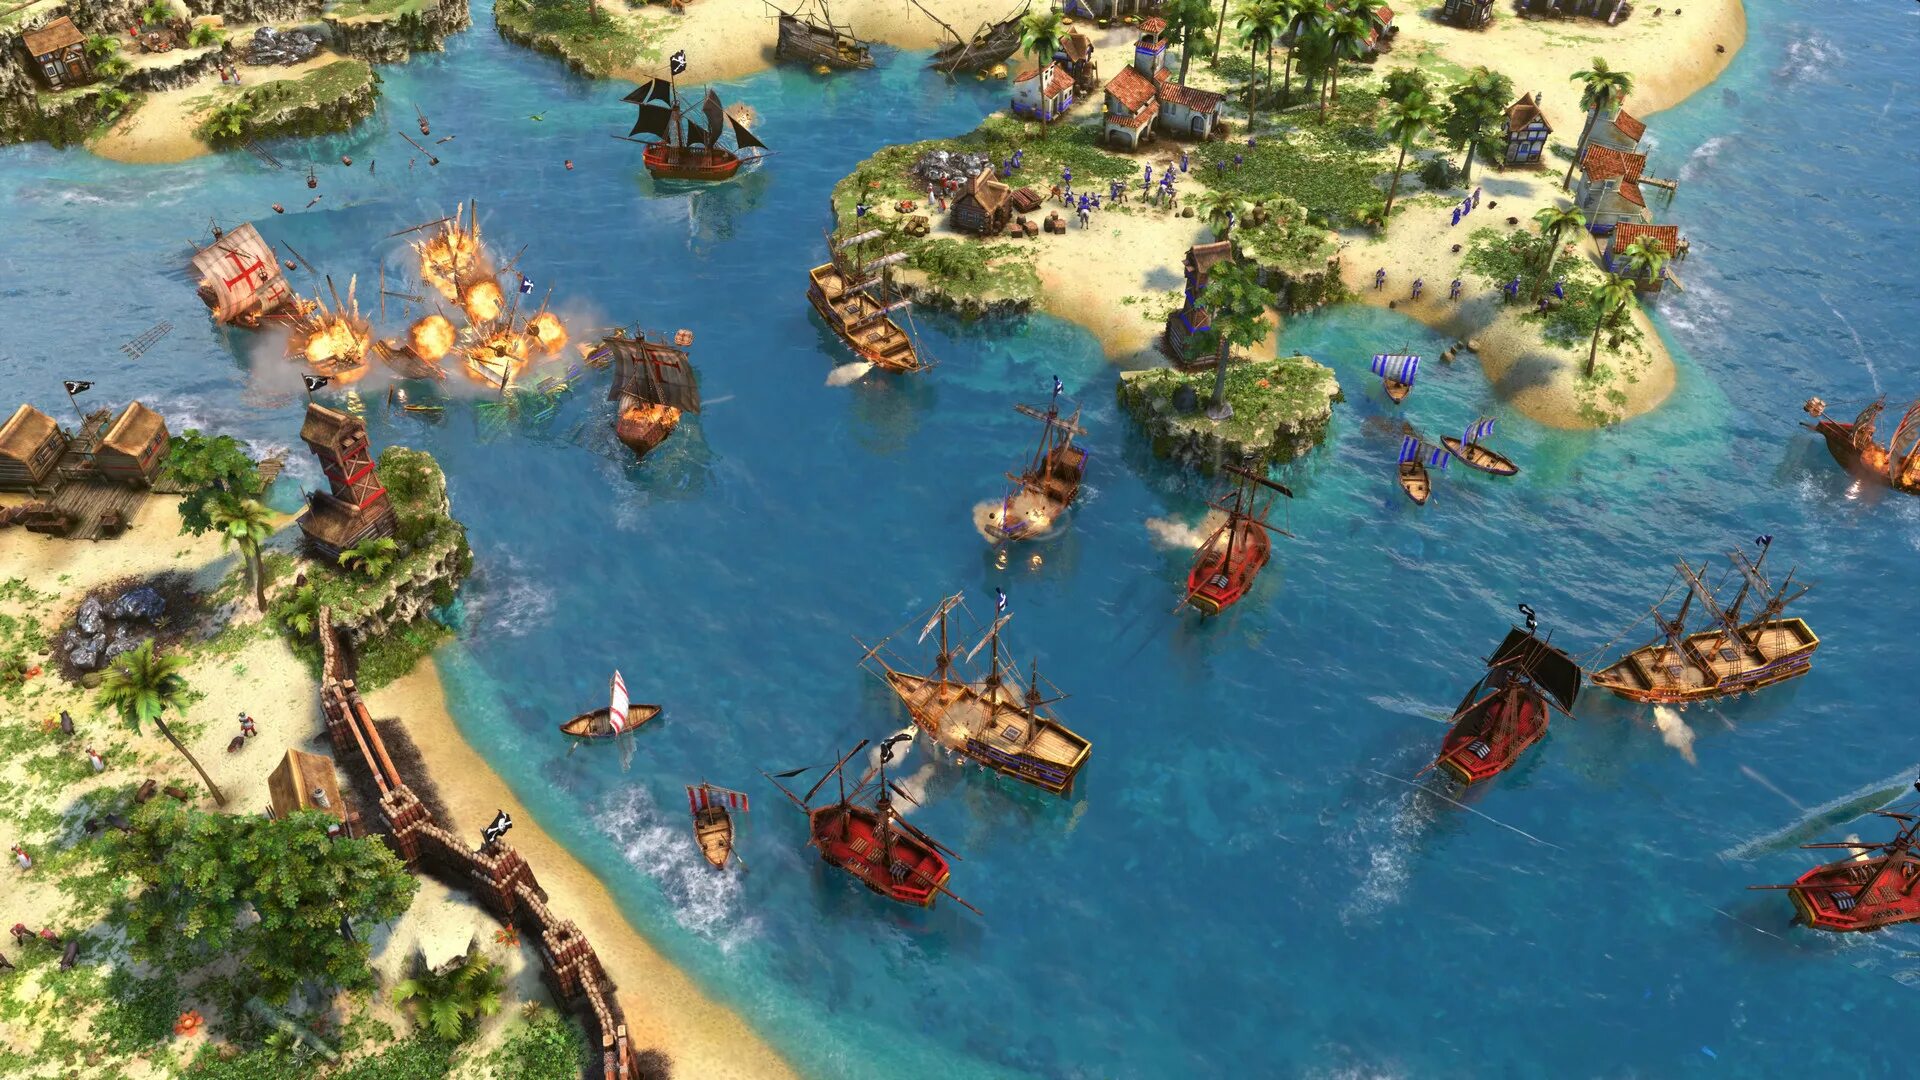 Age of Empires III: Definitive Edition. Age of Empires 3 Definitive Edition. Age of Empires 3 Definitive. AOE III Definitive Edition. Age pf